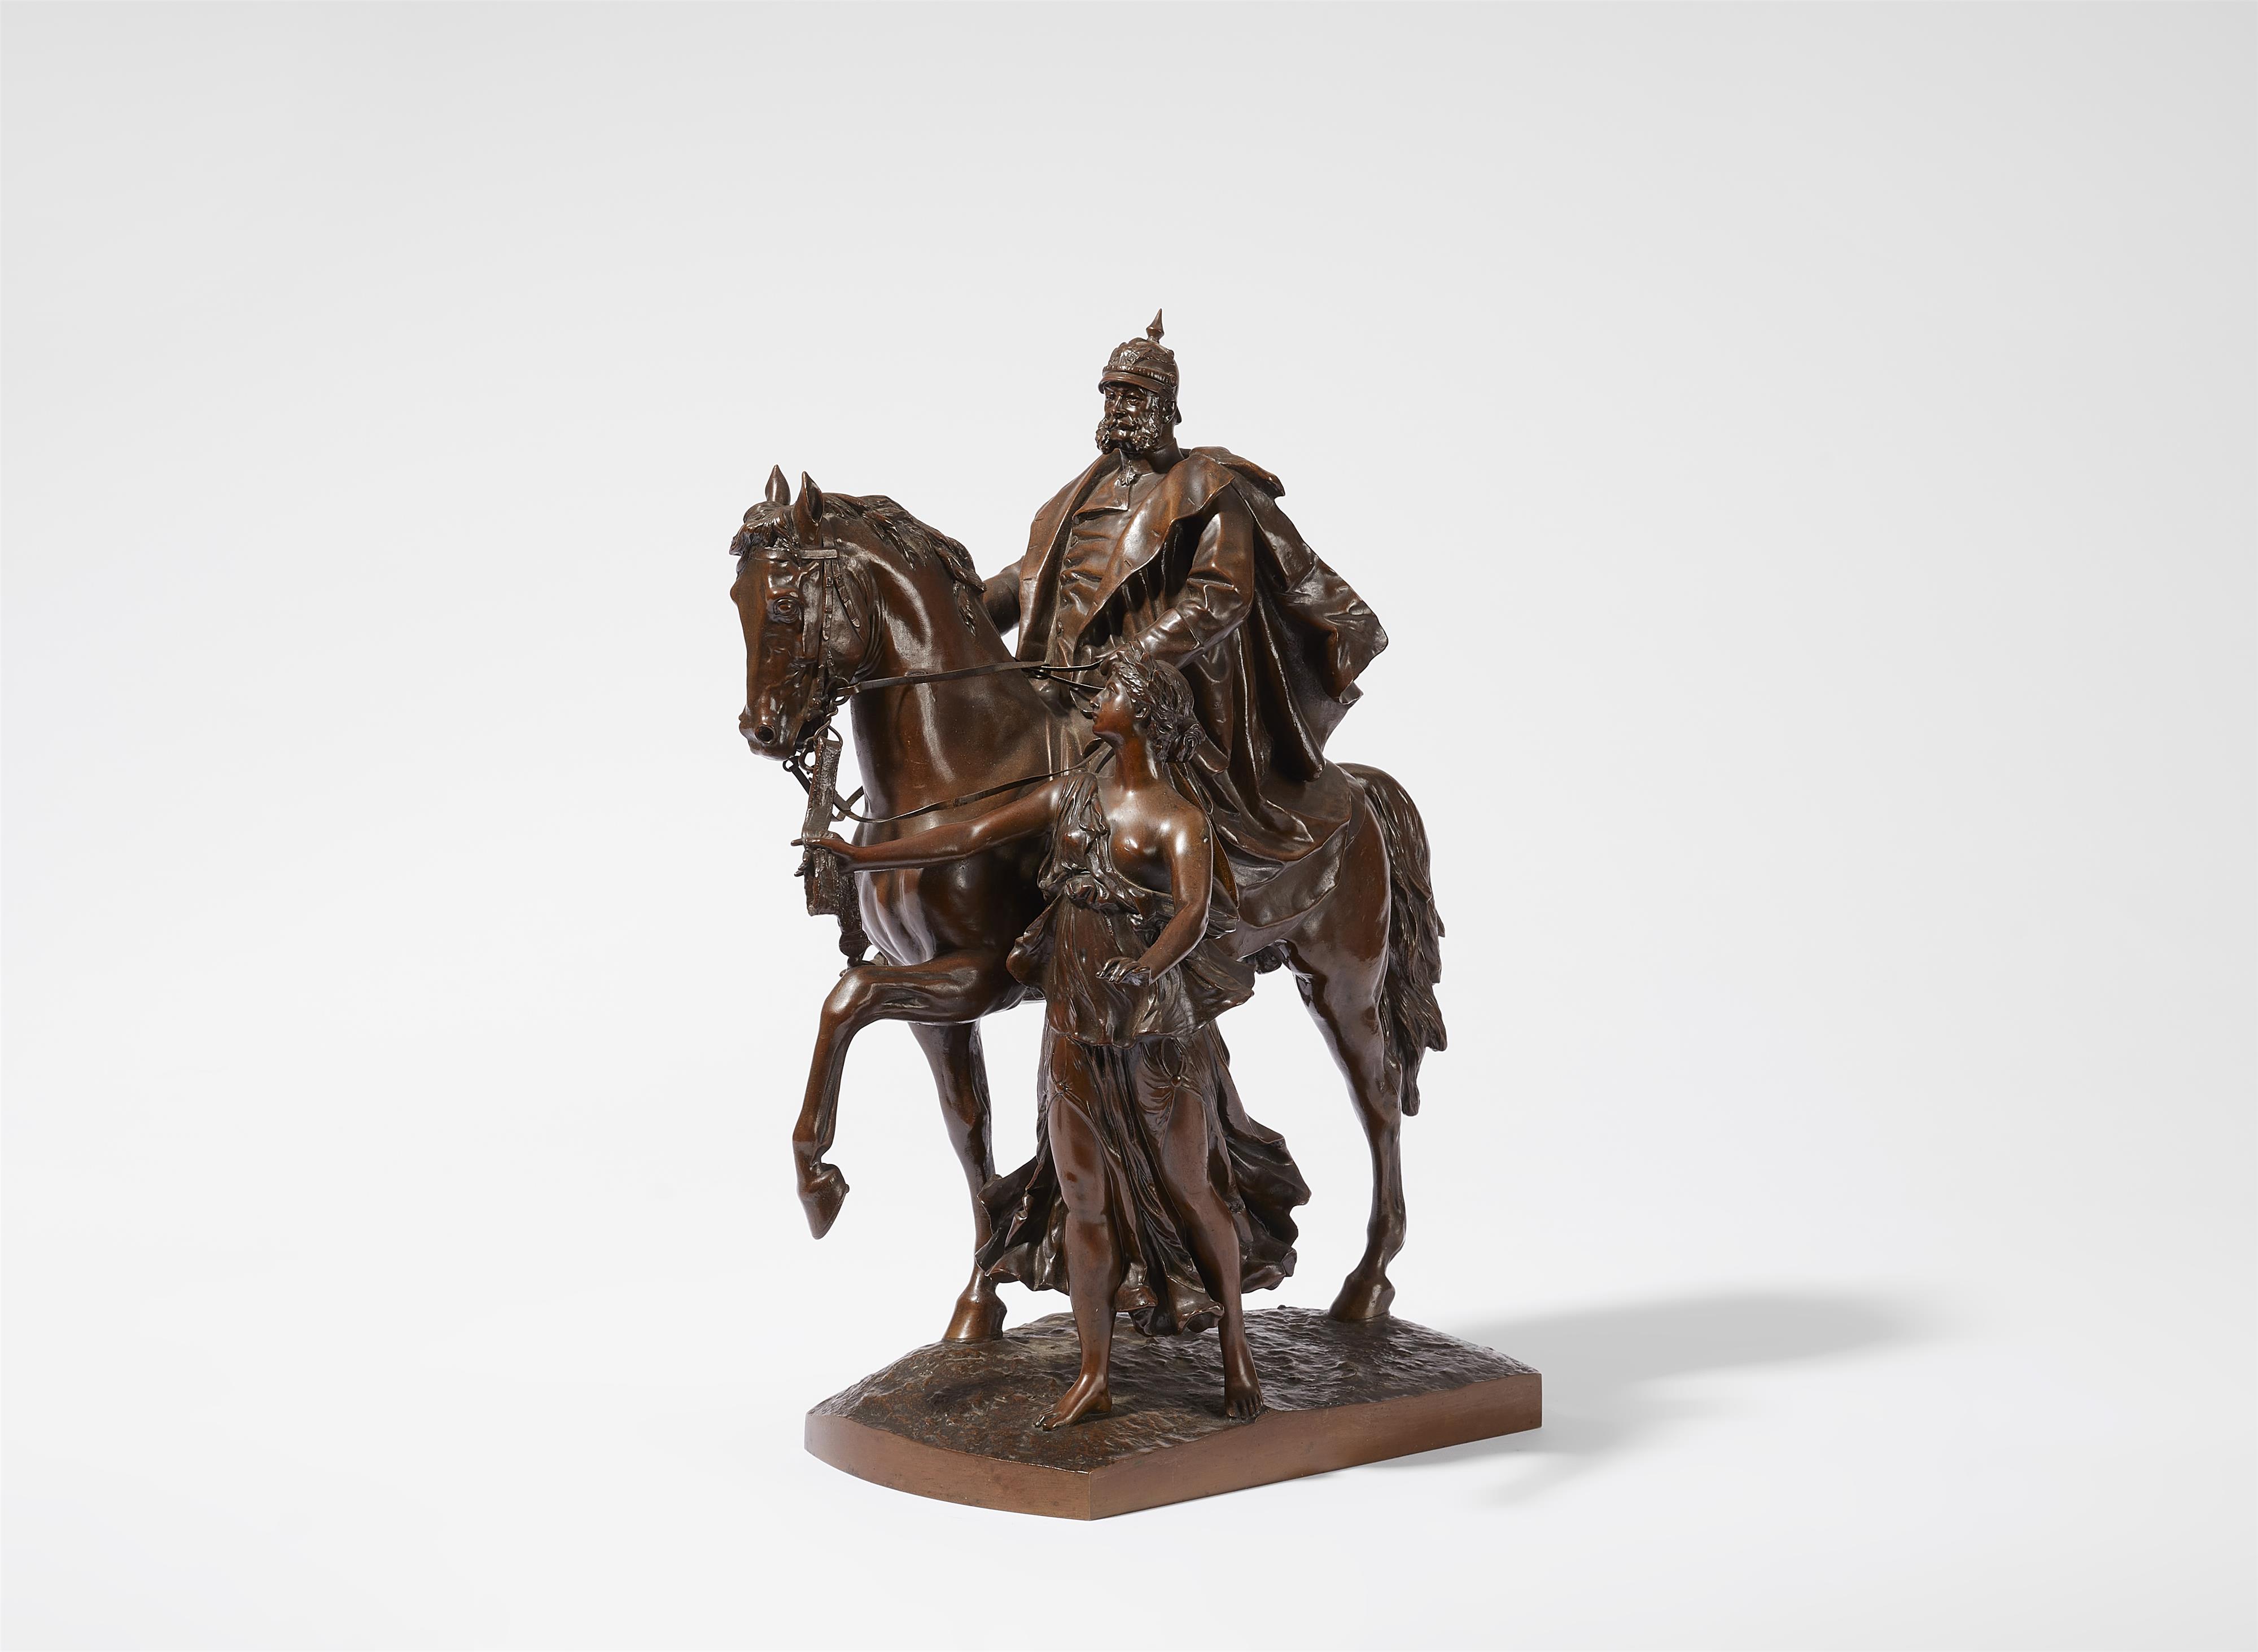 Reinhold Begas
Emperor Wilhelm I on horseback, guided by an allegory of victory - image-1